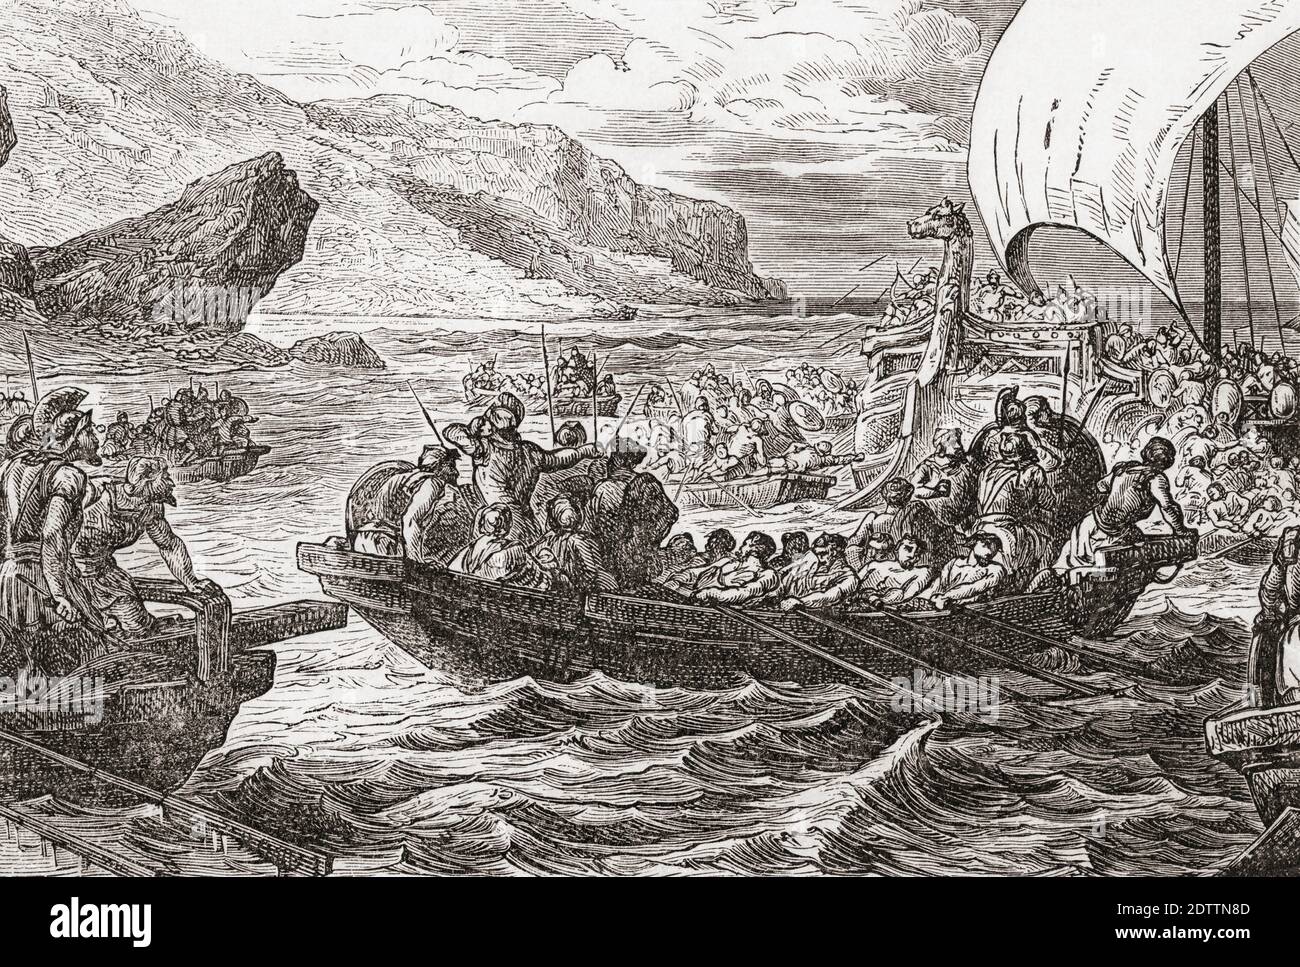 Phoenician fleet on voyage of discovery in the Mediterranean sea.  After a 19th century work by Paul Philippoteaux. Stock Photo